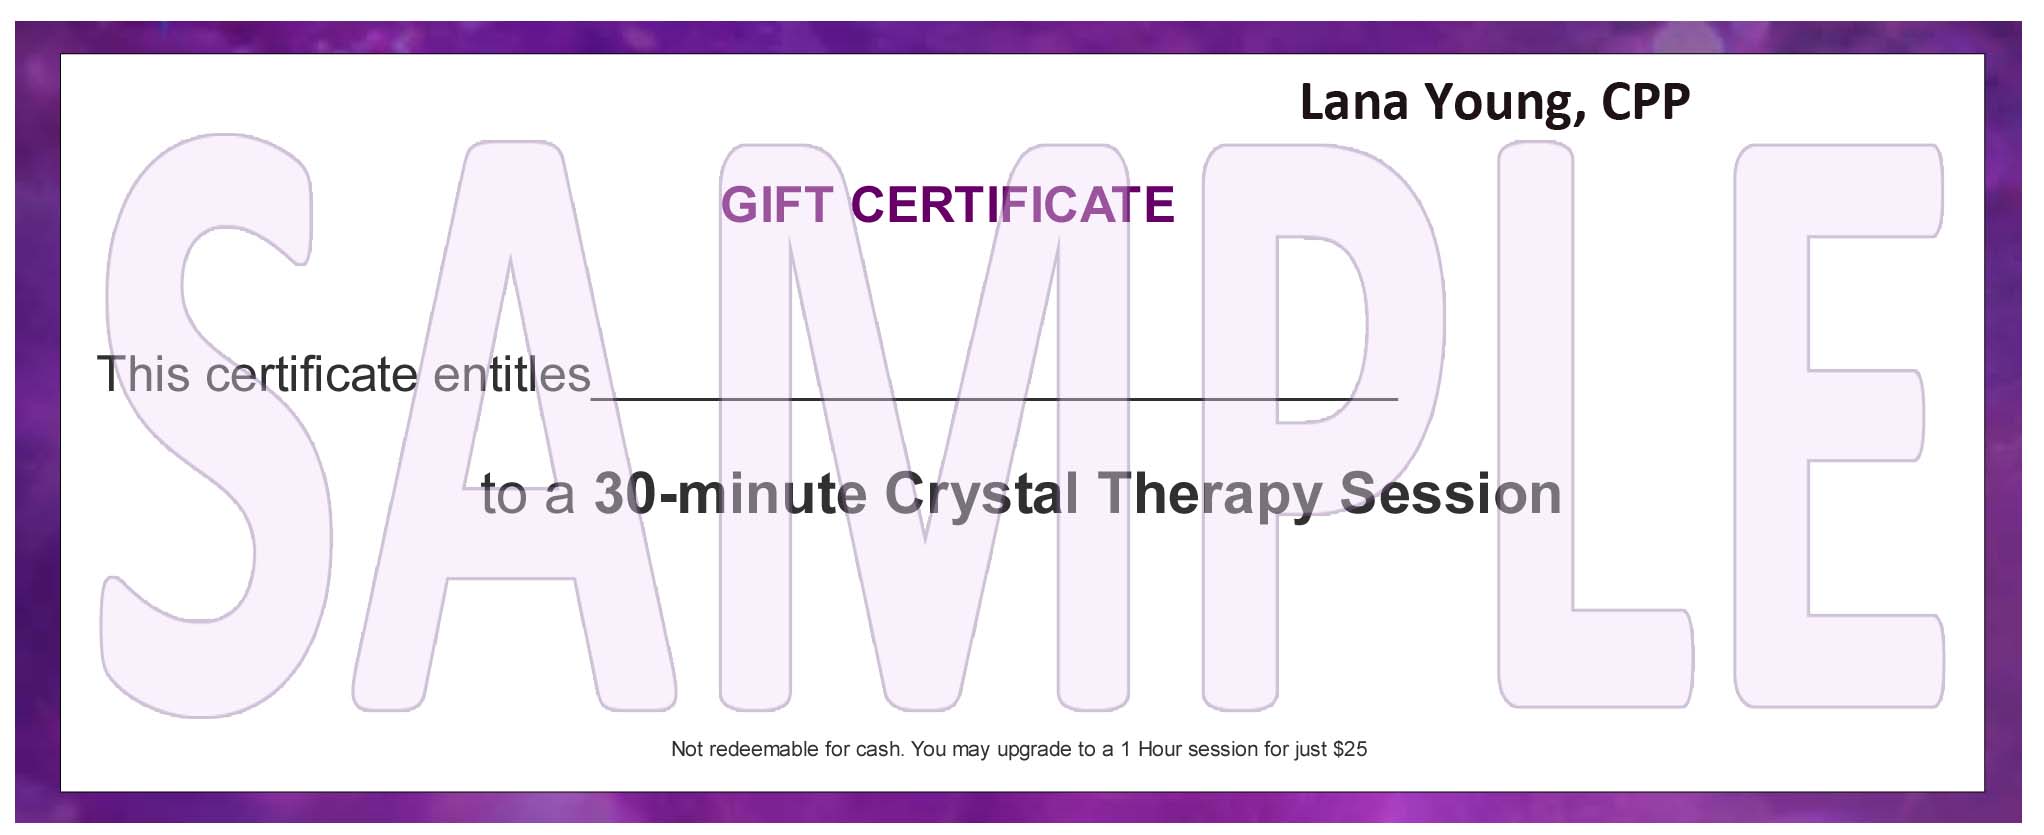 Sample Gift Certificate for FREE 30 Minute Crystal Therapy Session